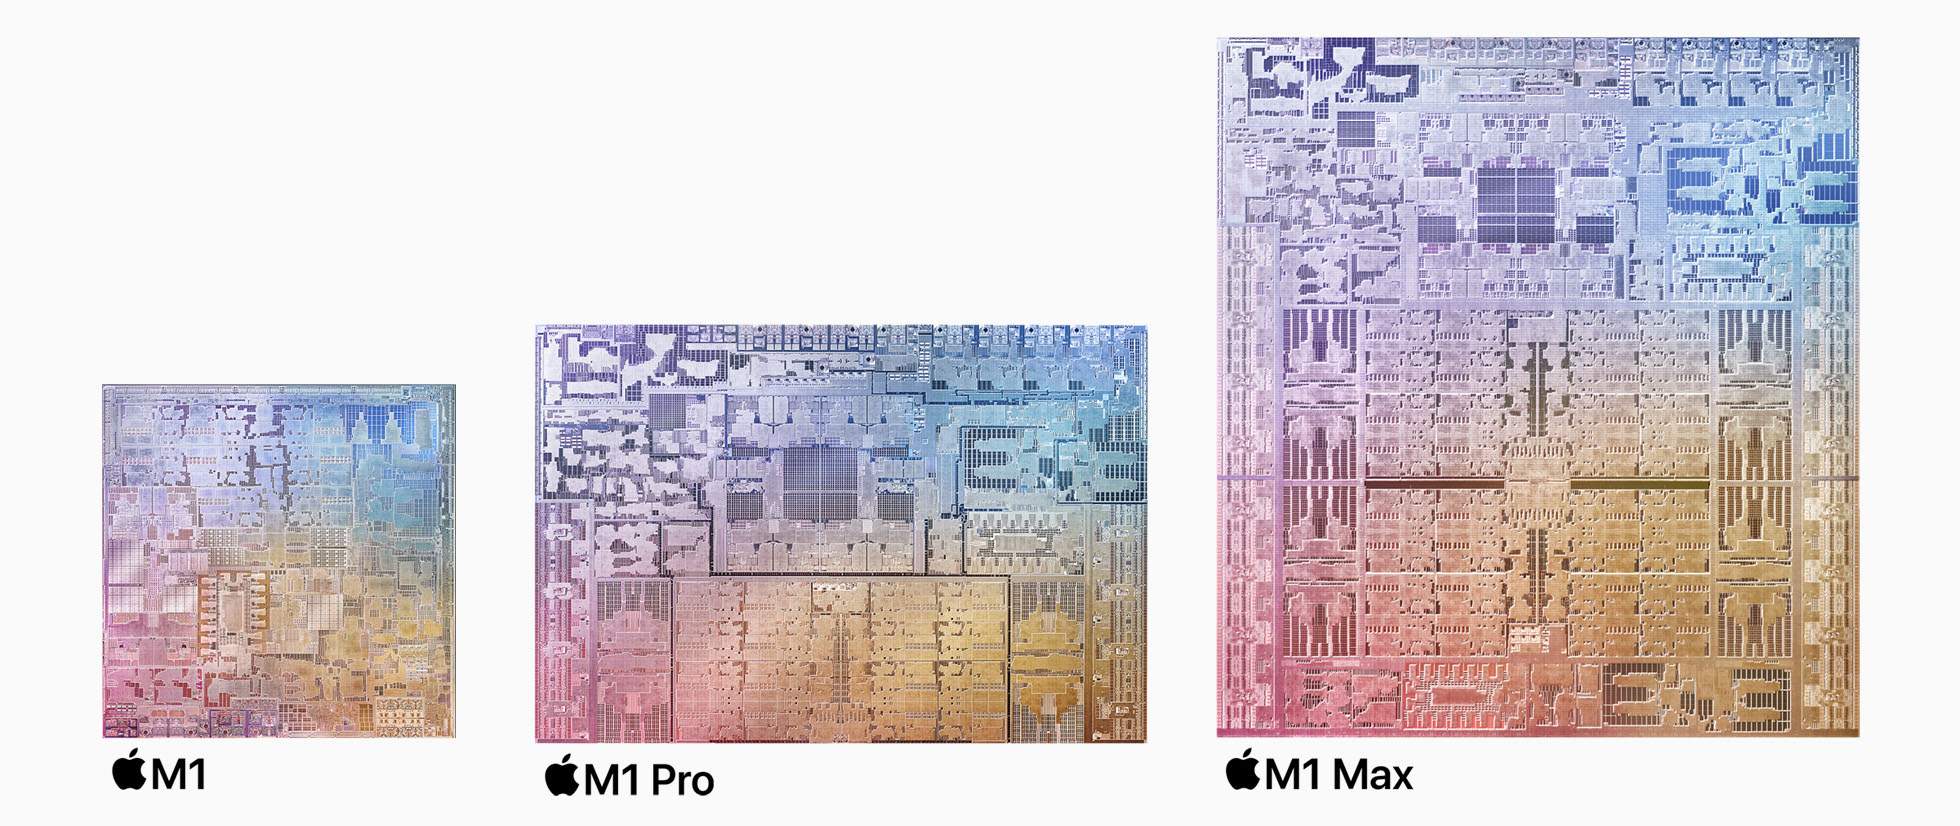 Bionic chip a15 Apple silicon